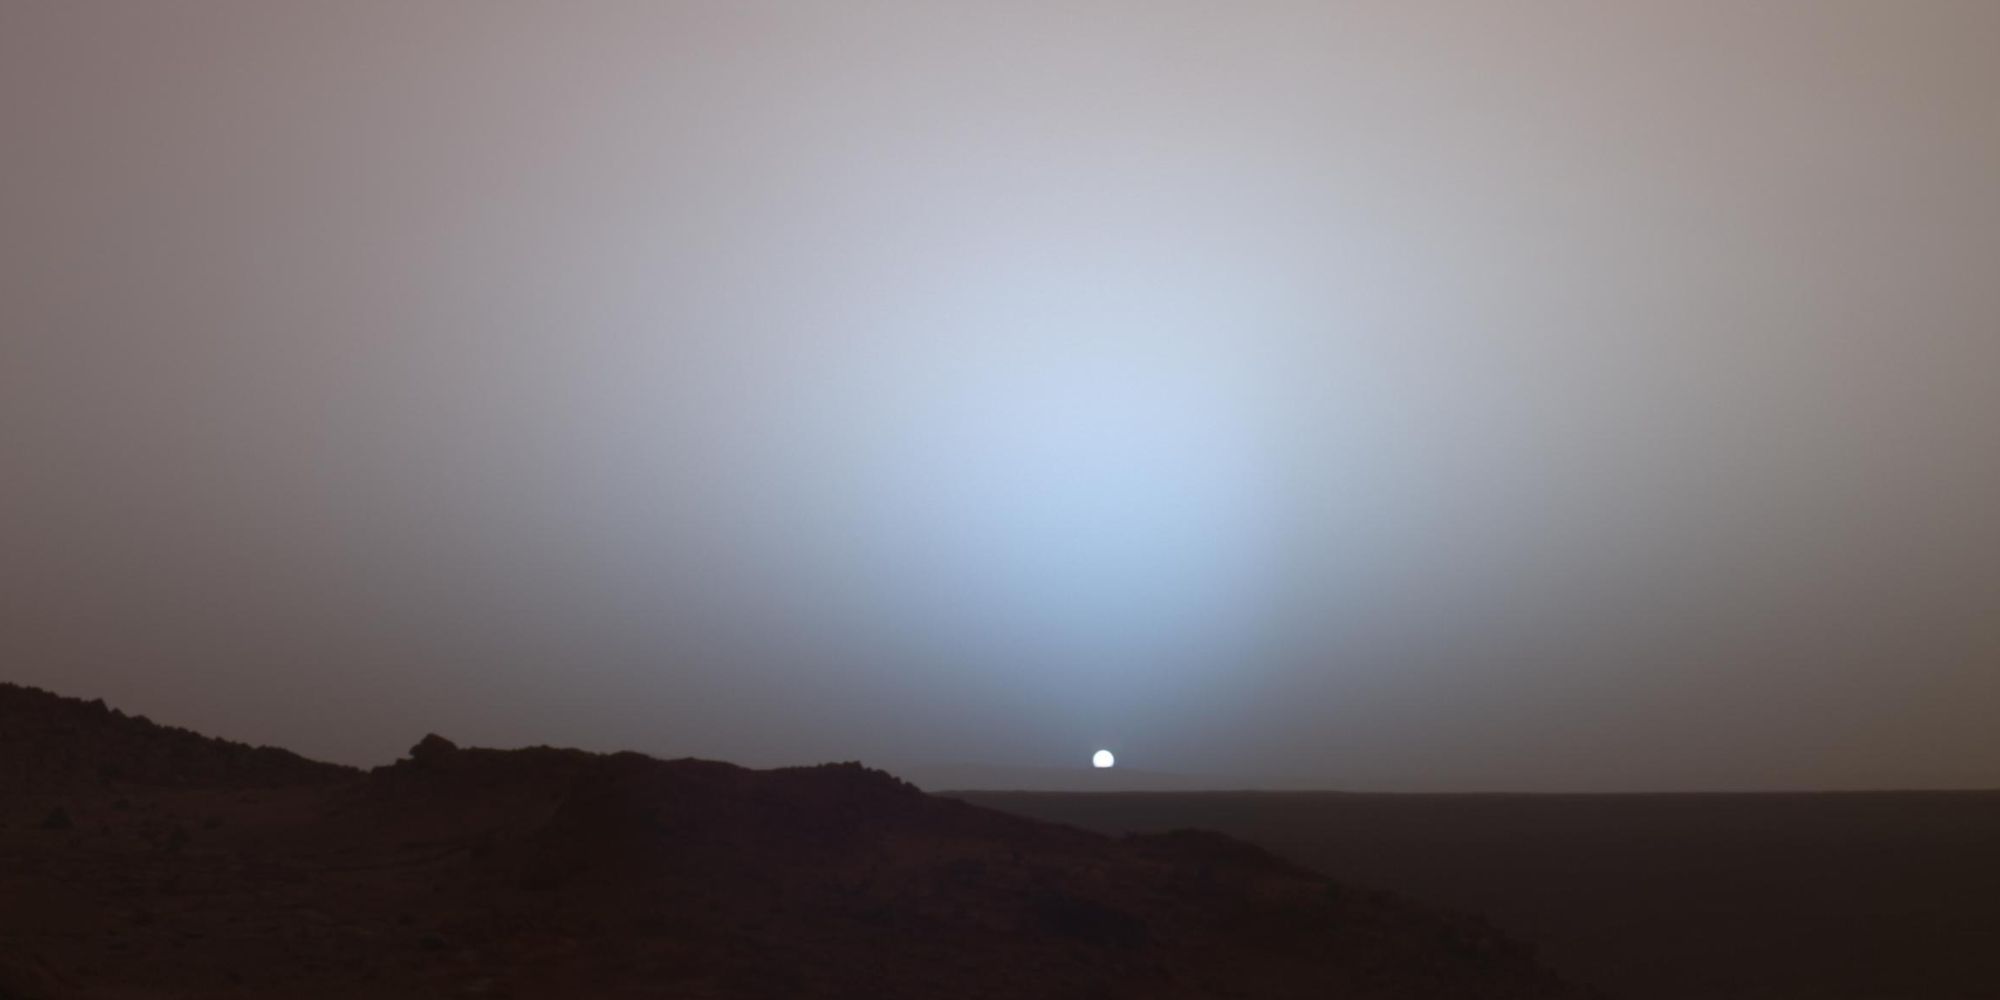 Photo of a Mars sunset, captured by the Spirit rover in 2005